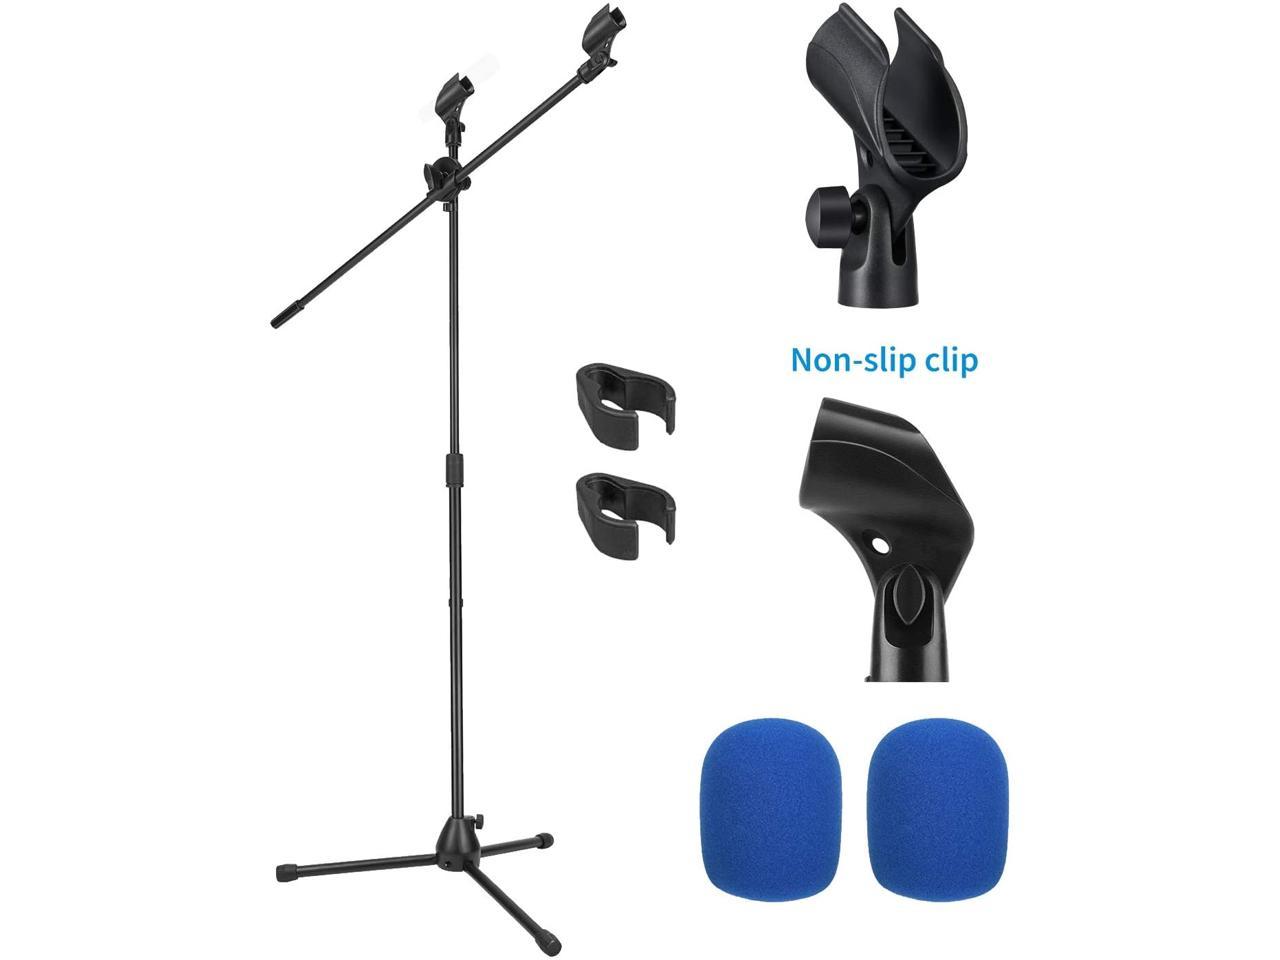 3 Mic Stand Tripod Boom Microphone Stands With 2 Non Slip Mic Clip Holders 2 Foam Cover Adjustable Collapsible For Shure Sm7b Sm58 Black Newegg Com